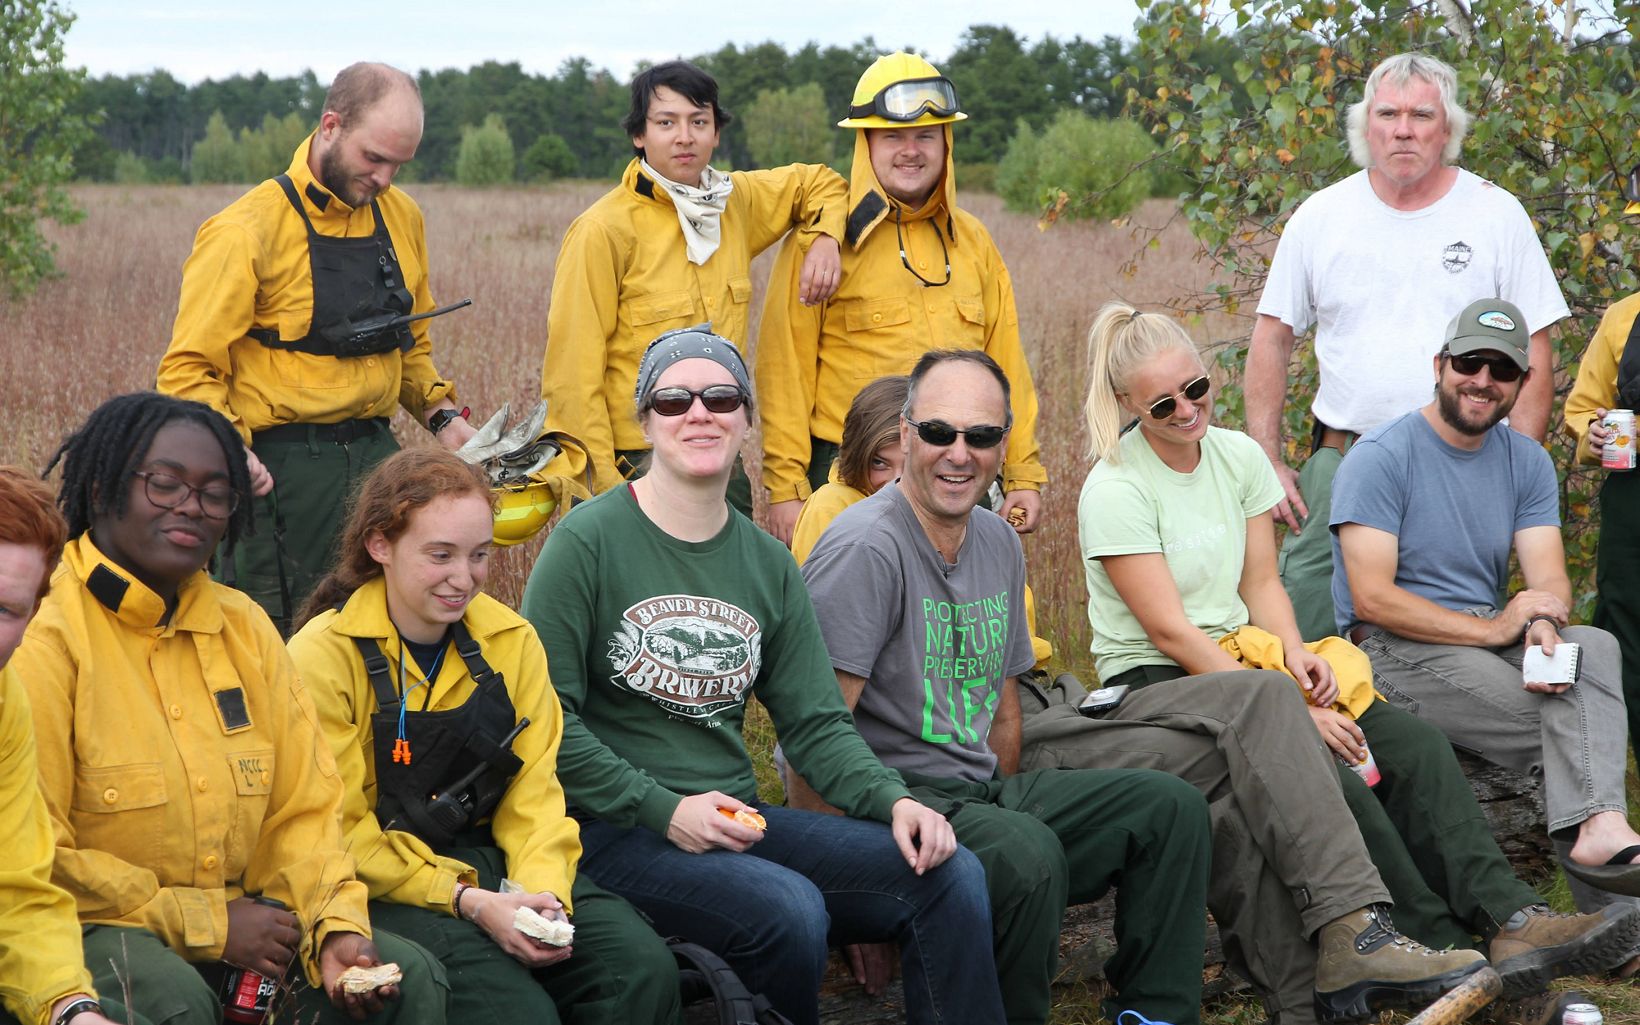 Prescribed fire crew team members relaxing after a controlled burn at Kennebunk Plains Preserve.